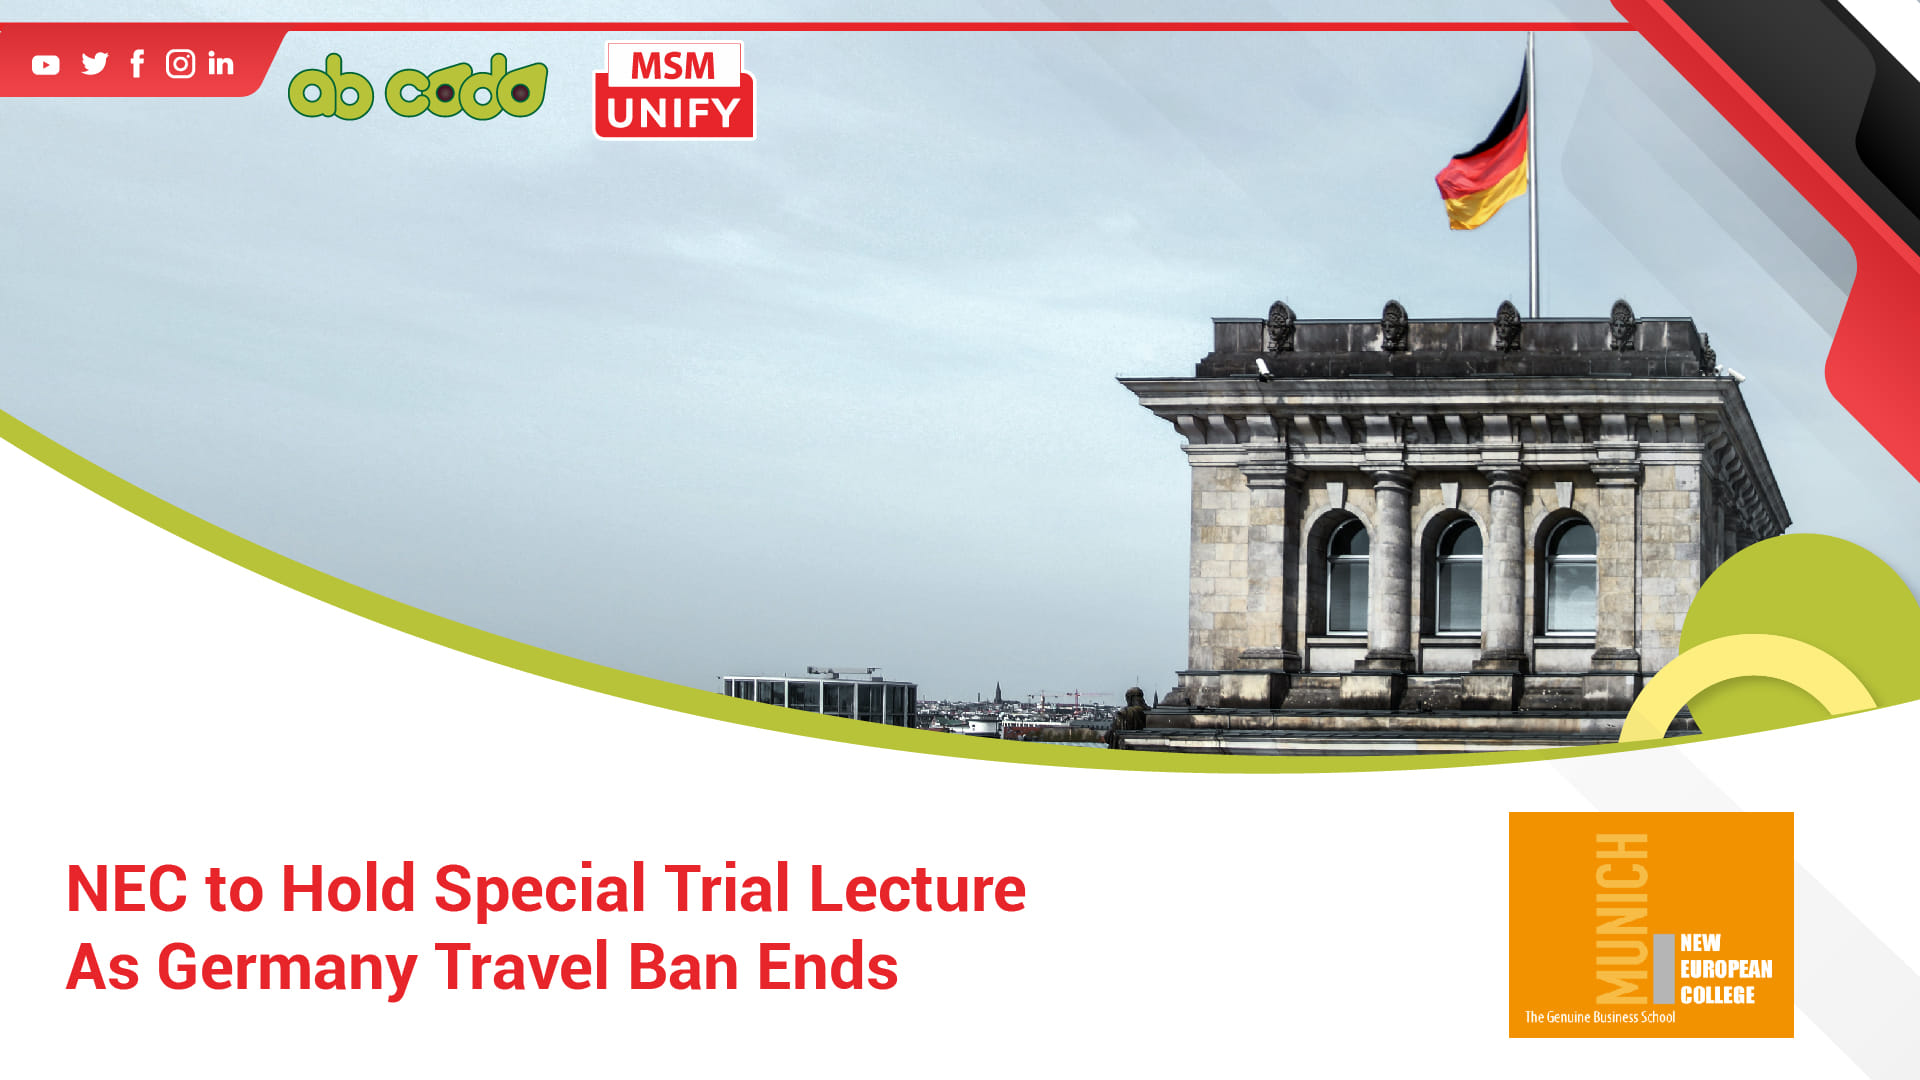 nec special trial lecture banner